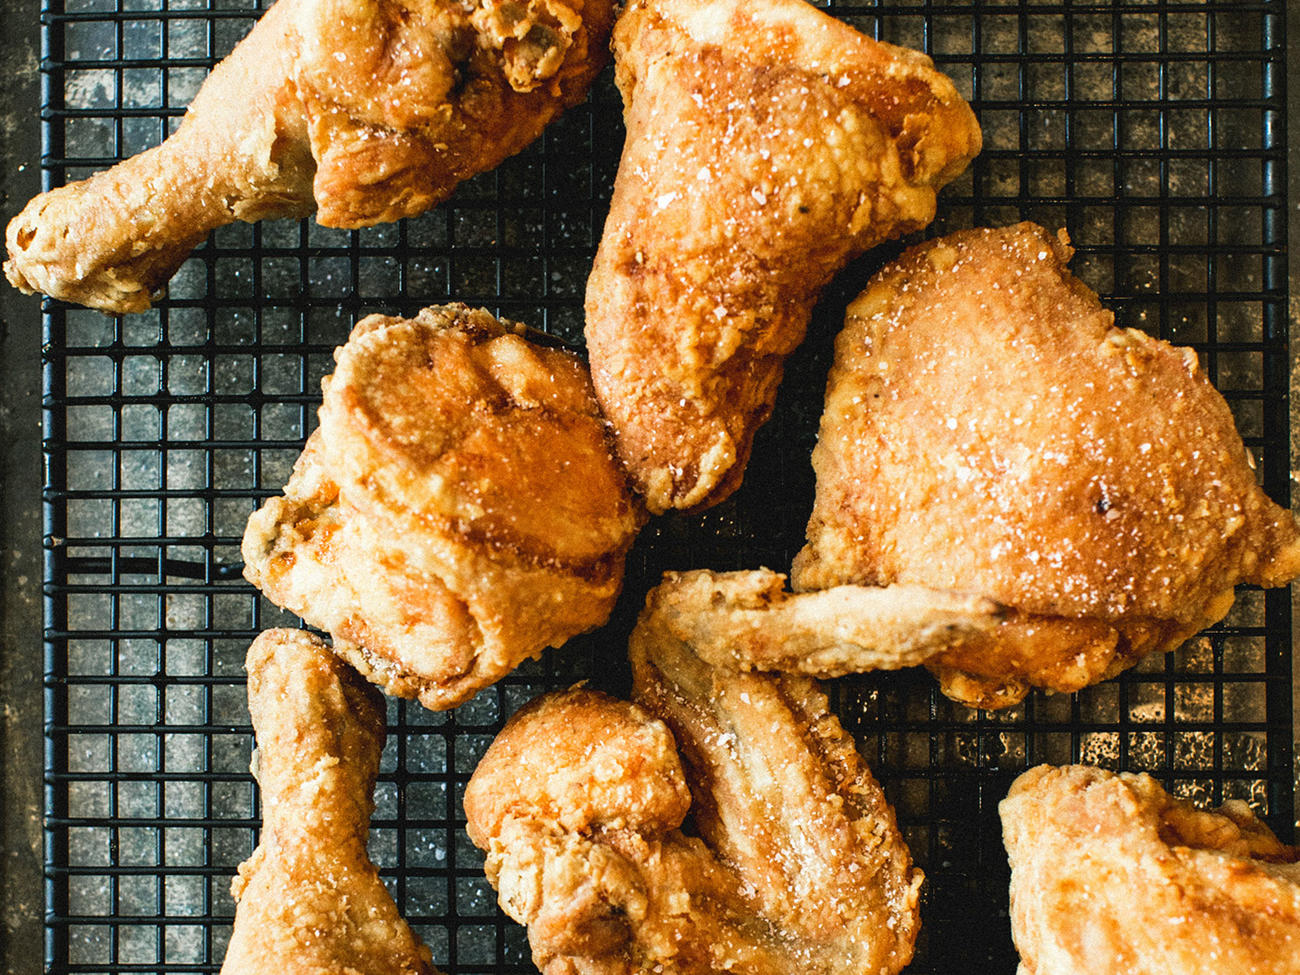 Six Crispy, Juicy, Fried Chicken Recipes That Are Better Than Popeyes